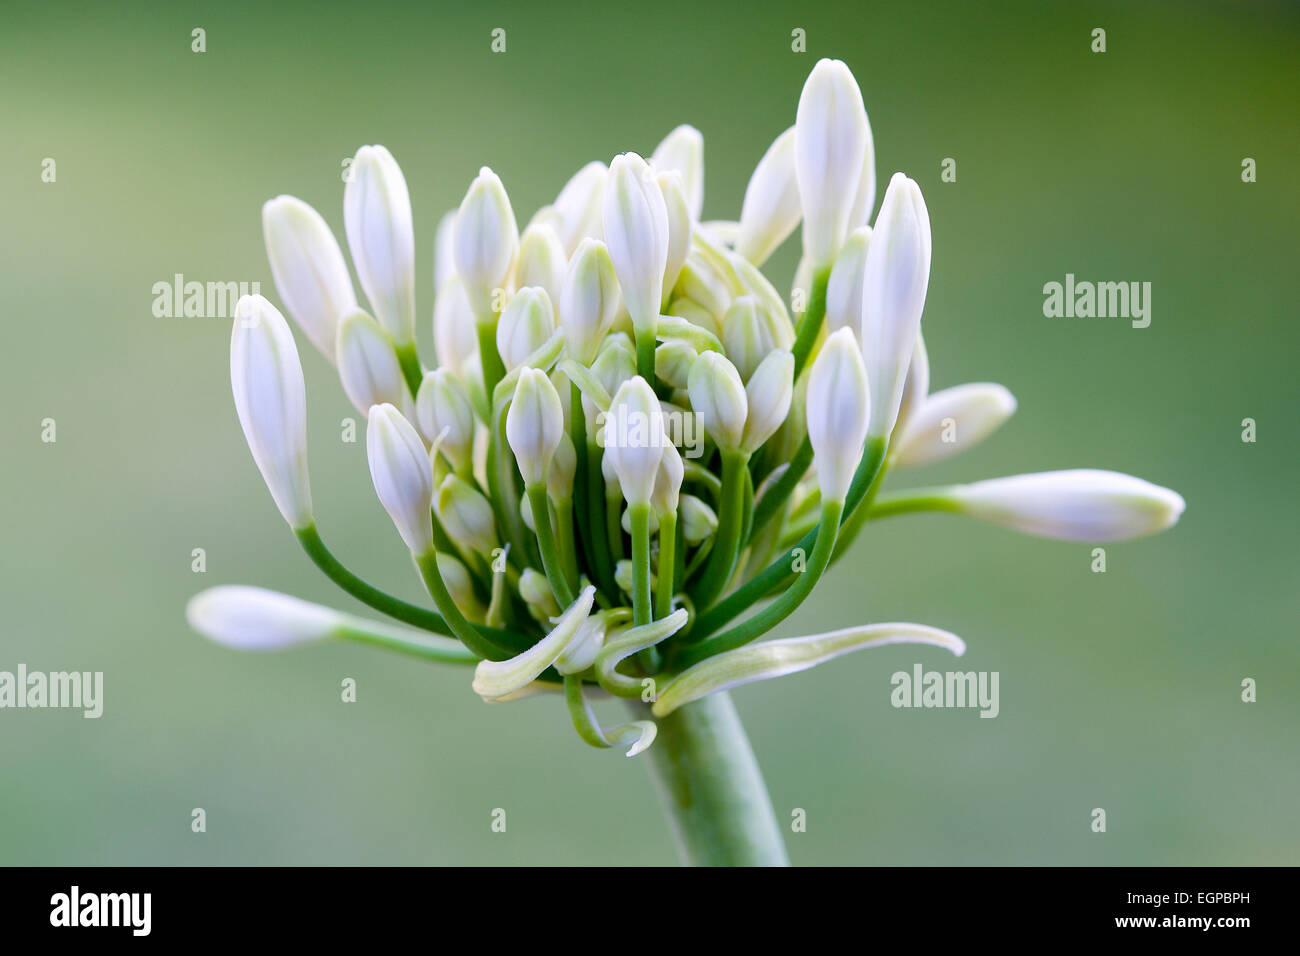 Agapanthus africanus, Close view of white flowers emerging into an umbel shaped flowerhead, against green background, Stock Photo